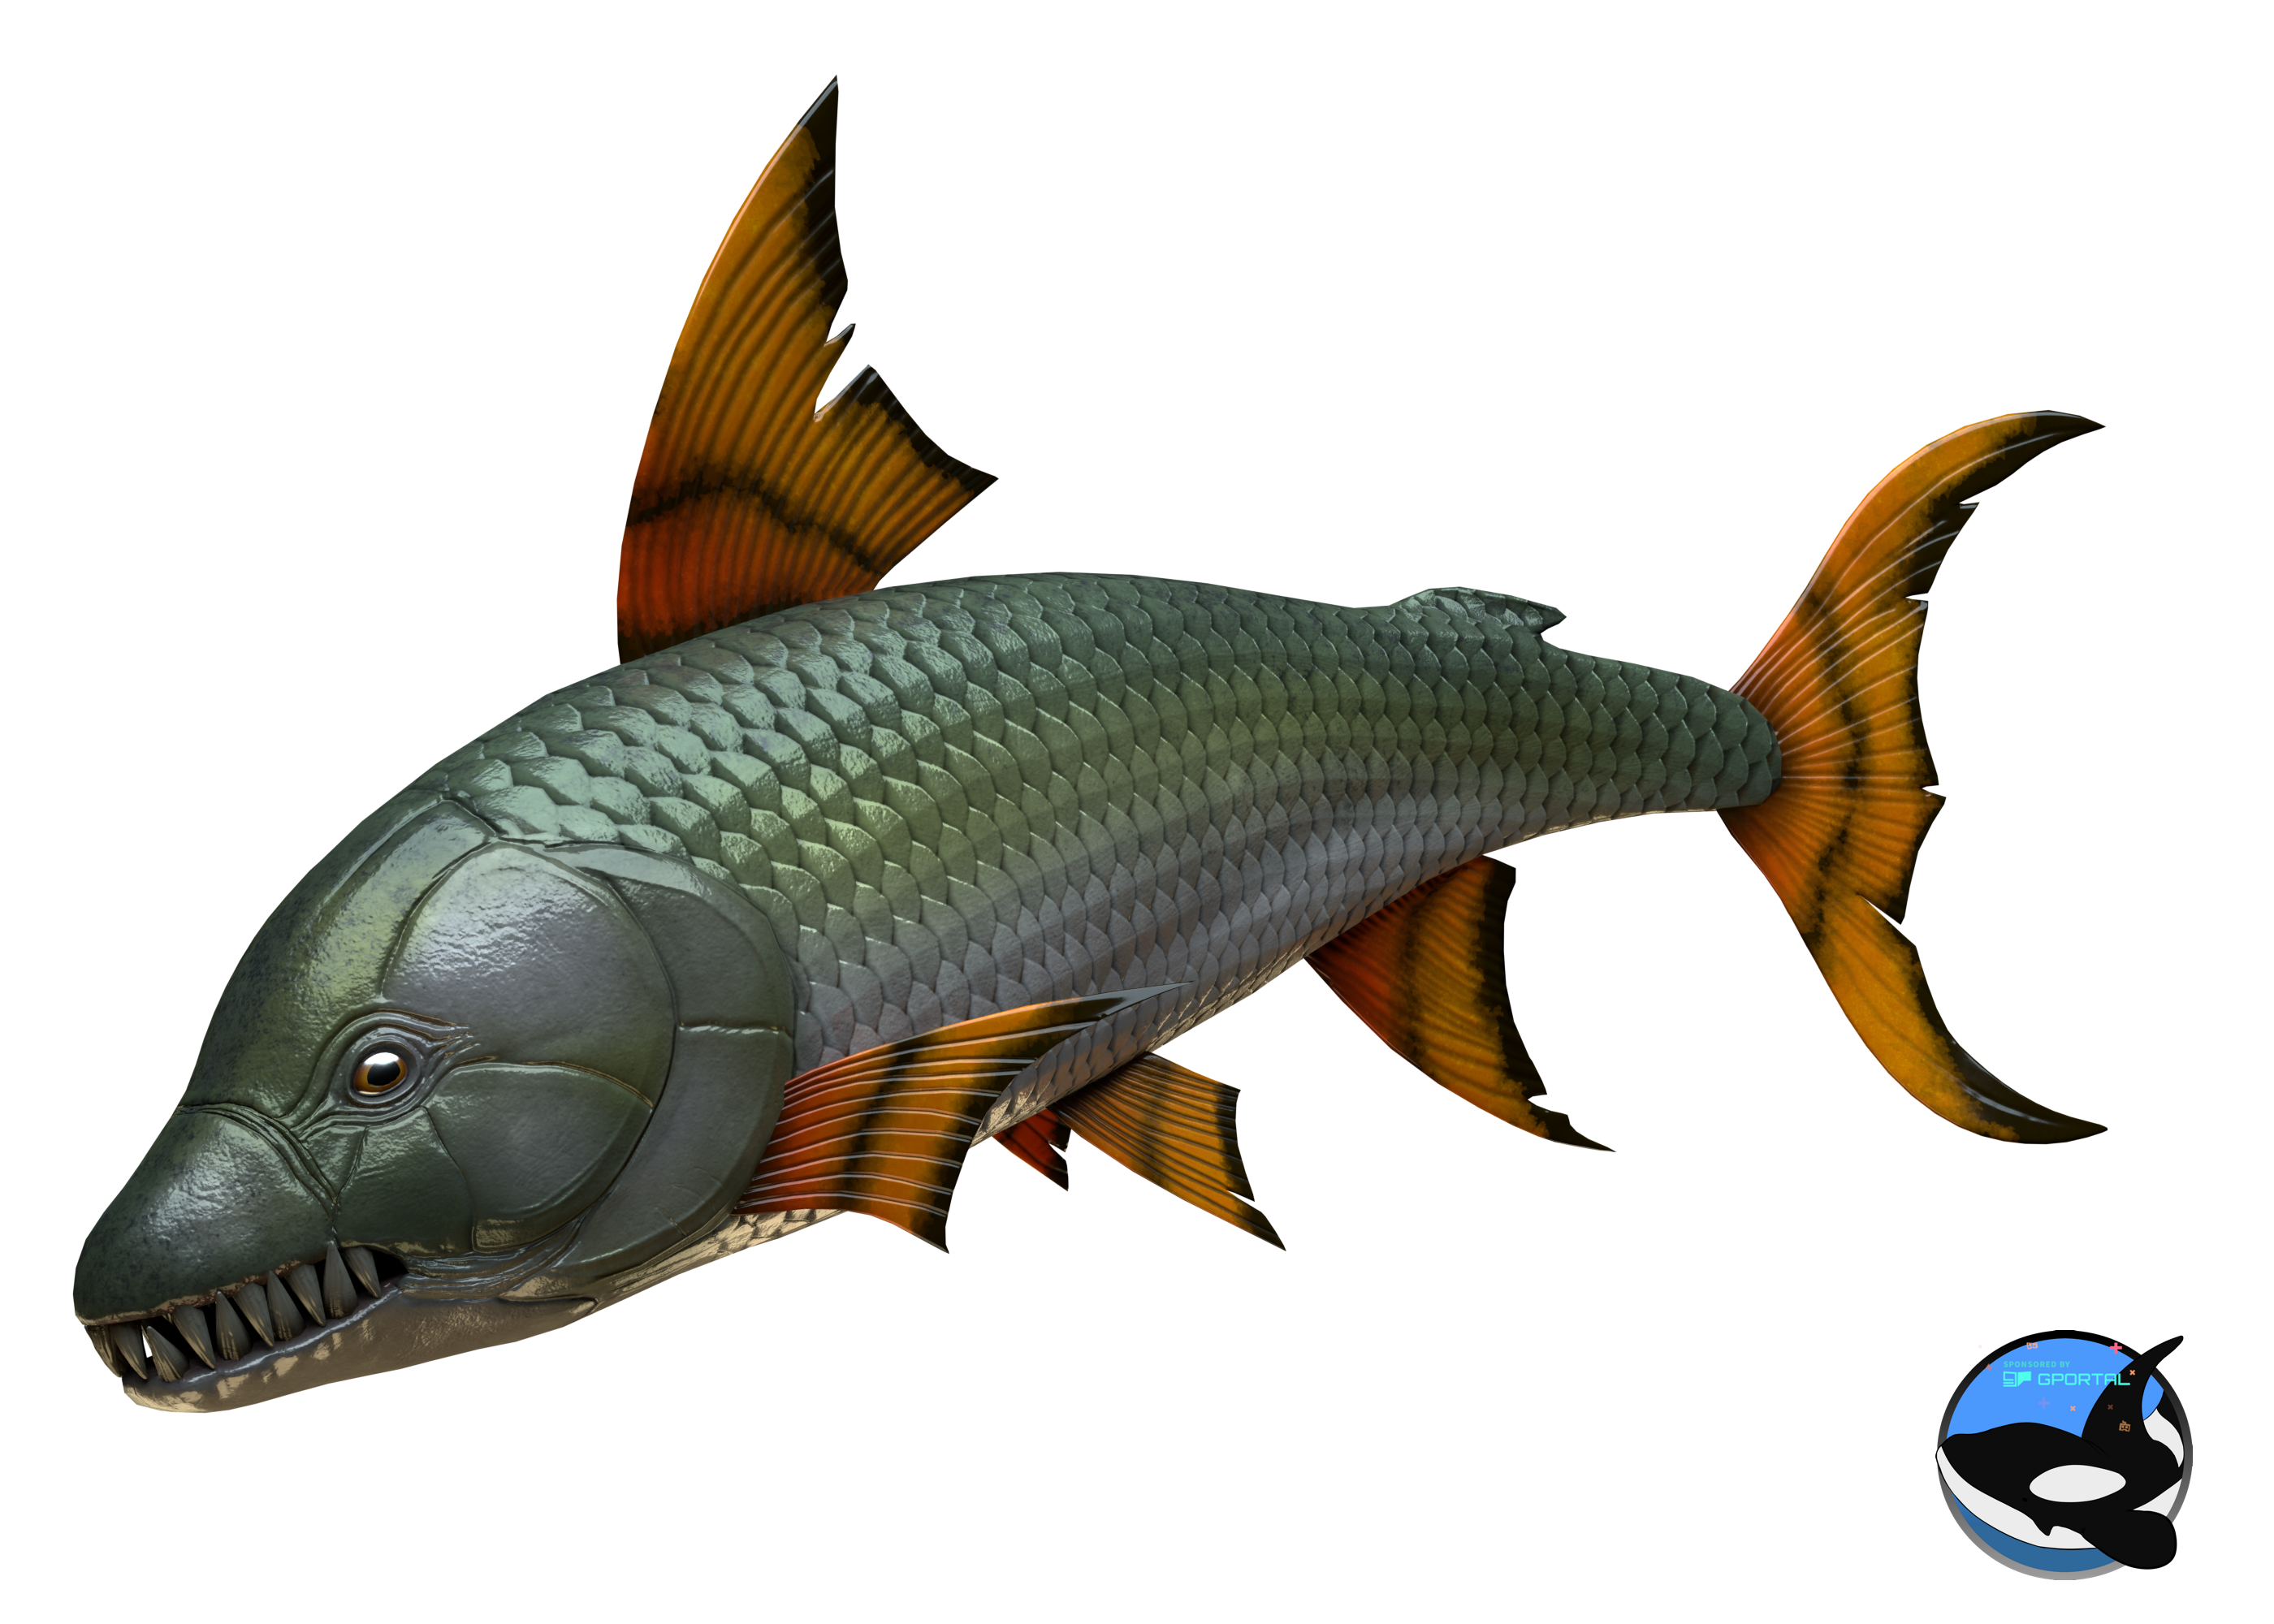 https://static.wikia.nocookie.net/additional-creatures/images/1/16/Tigerfish_Render.png/revision/latest?cb=20201119042528